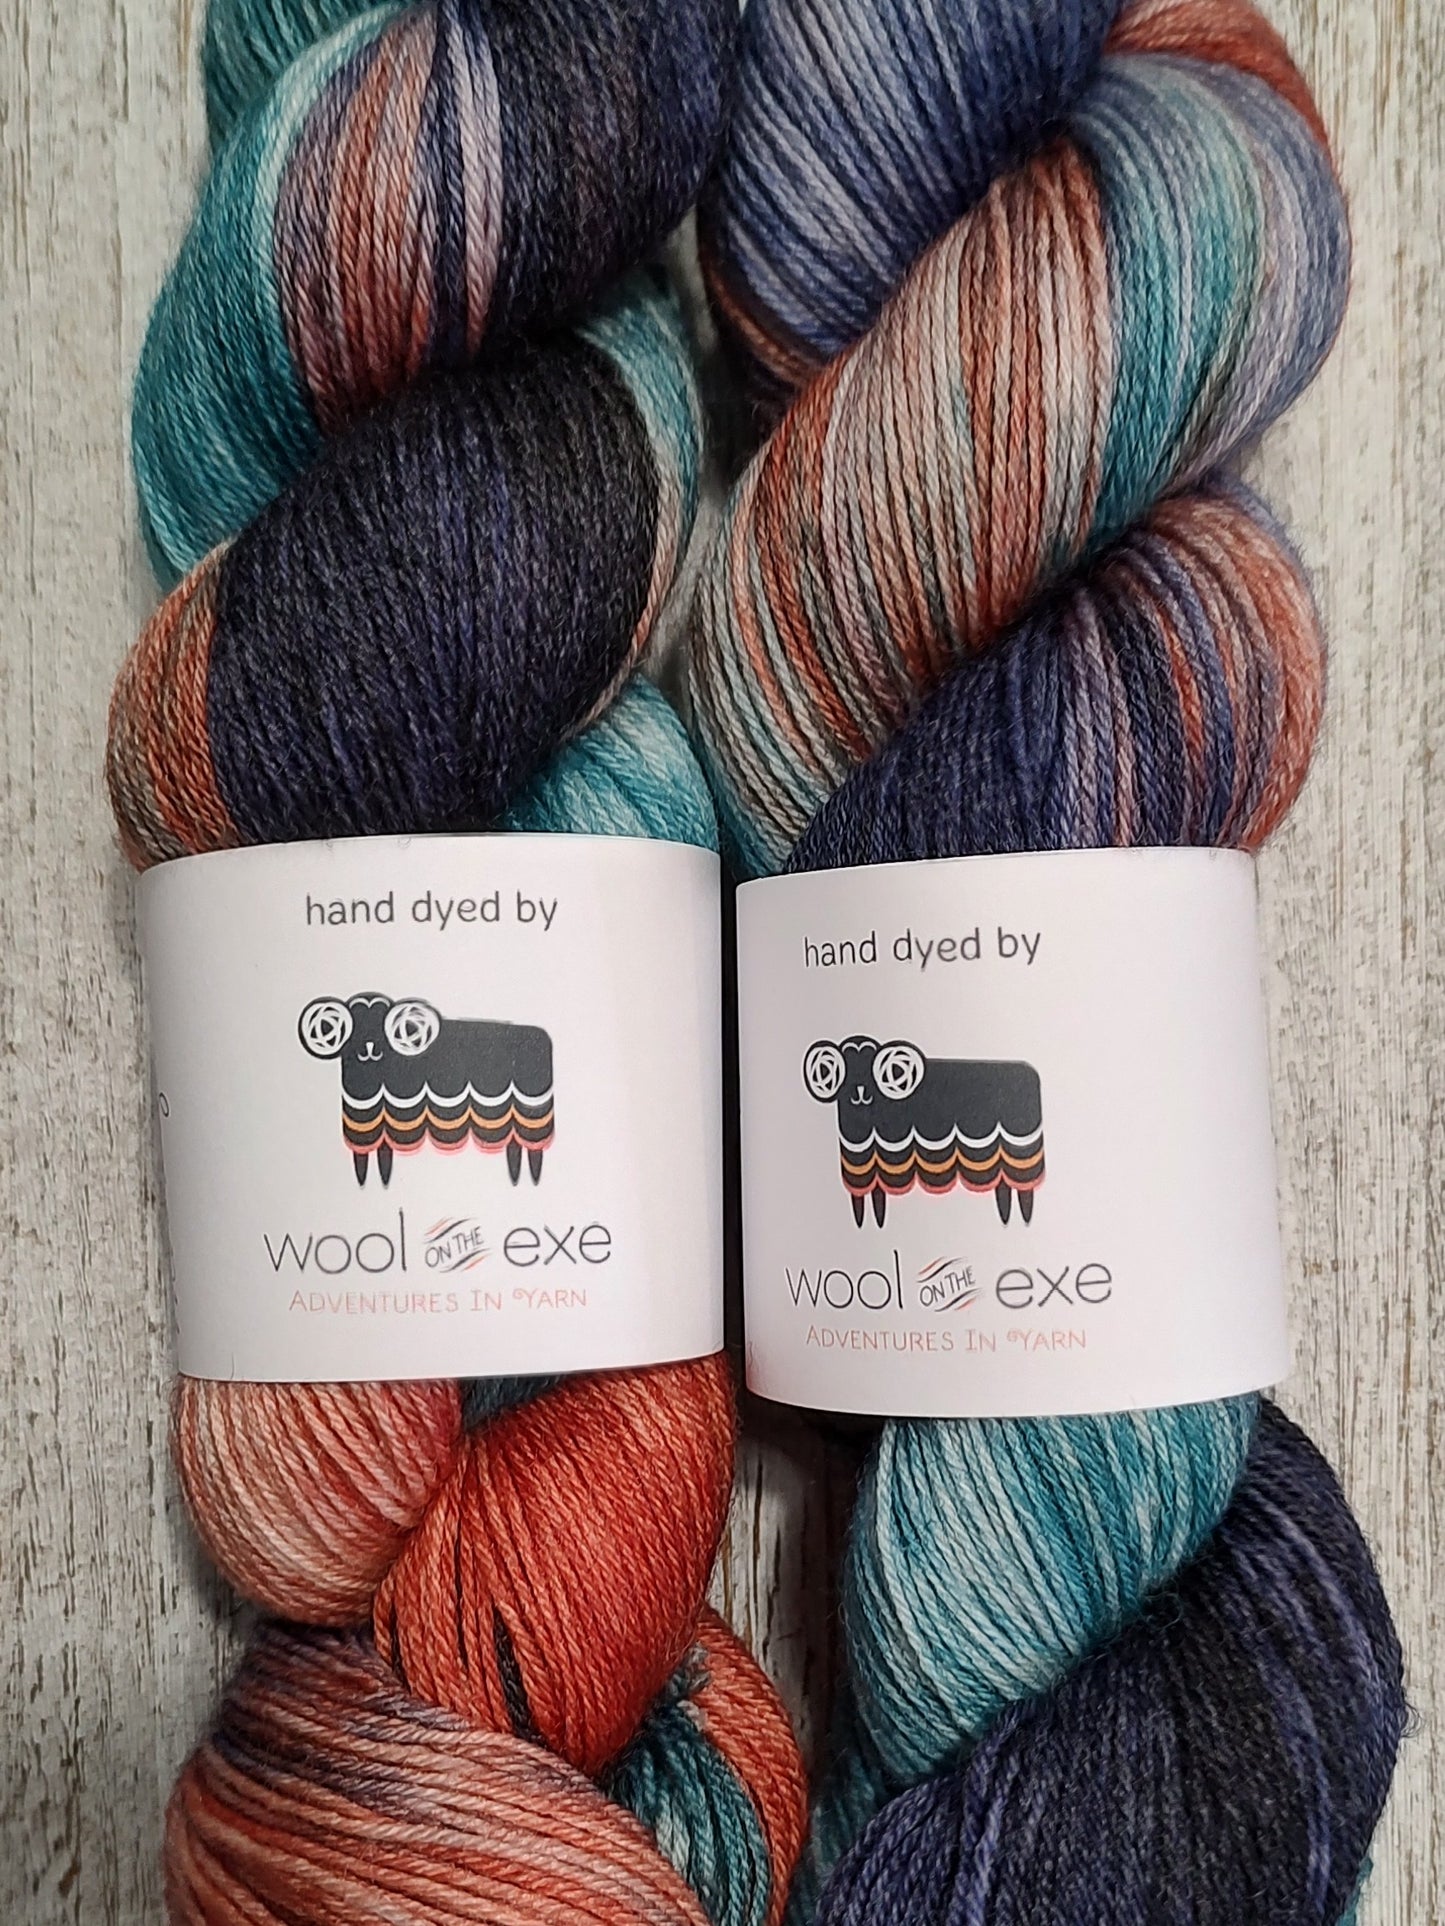 BFL Sock hand dyed